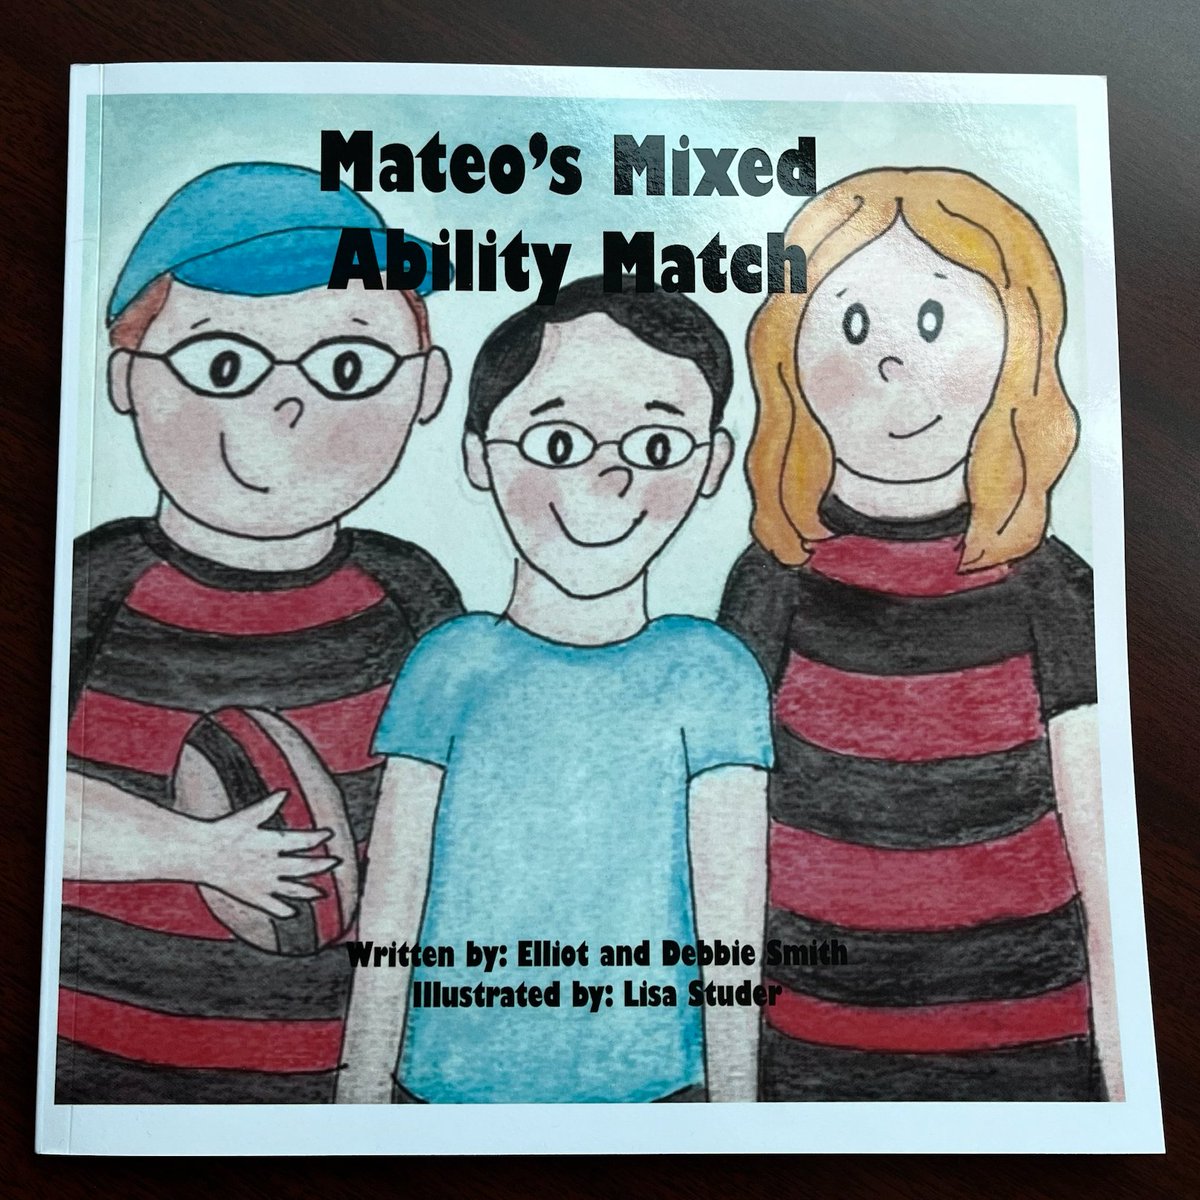 Ajax Council recognized the Oshawa Vikings last night for their silver medal finish at the International Mixed Ability Rugby Tournament in Ireland. Team co-captain and Ajax resident Elliot Smith sent me a copy of his book “Mateo’s Mixed Ability Match.”